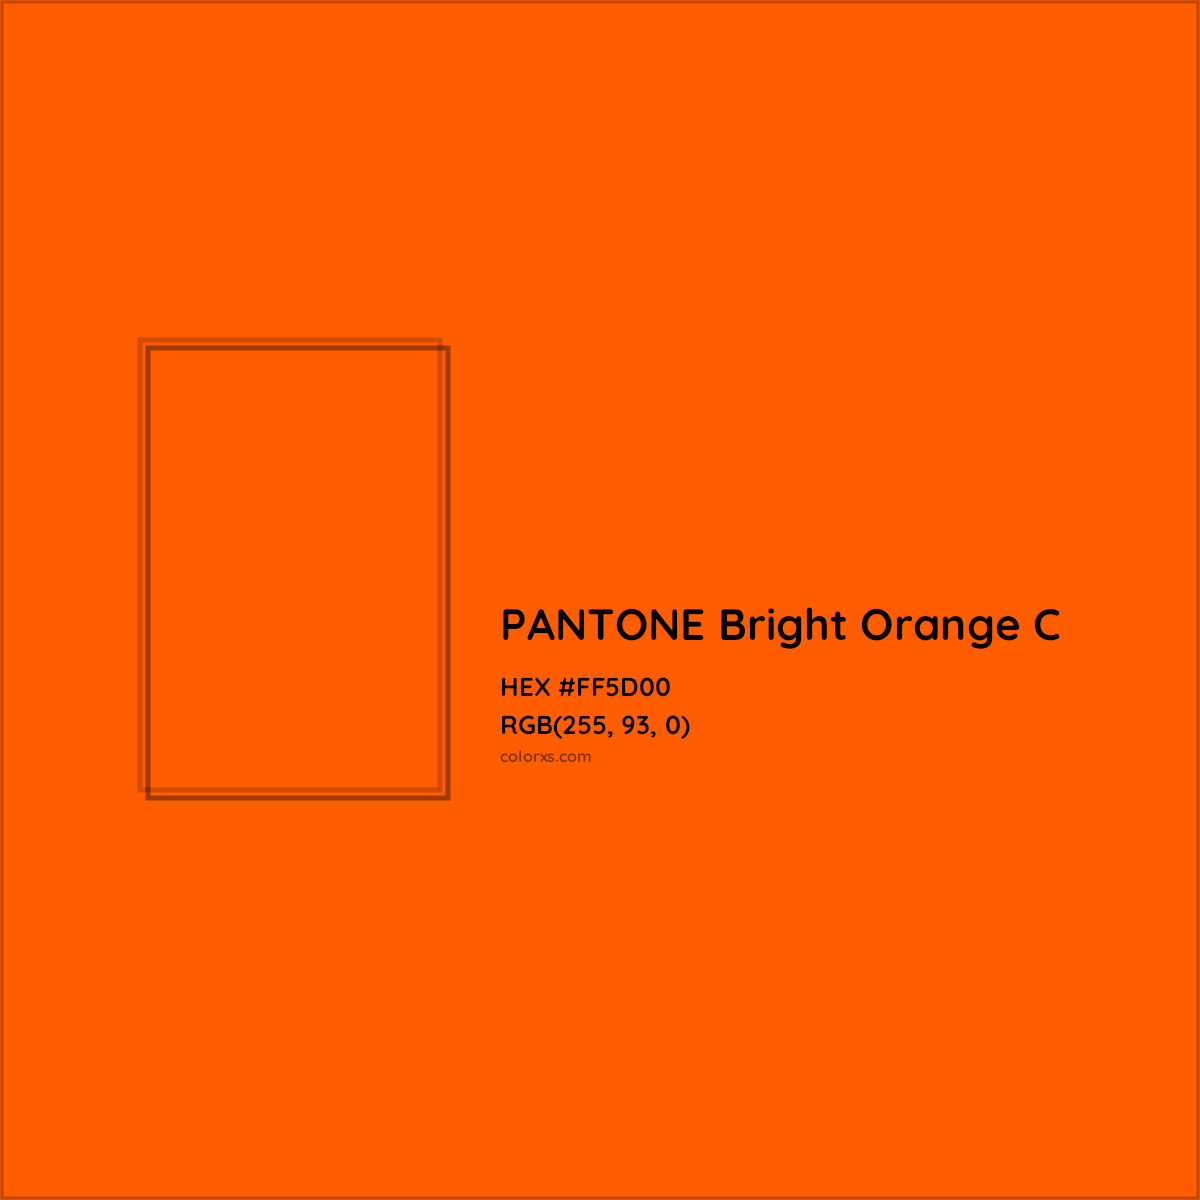 PANTONE Bright Orange C Complementary Opposite Color Name and Code (#FF5D00) - colorxs.com